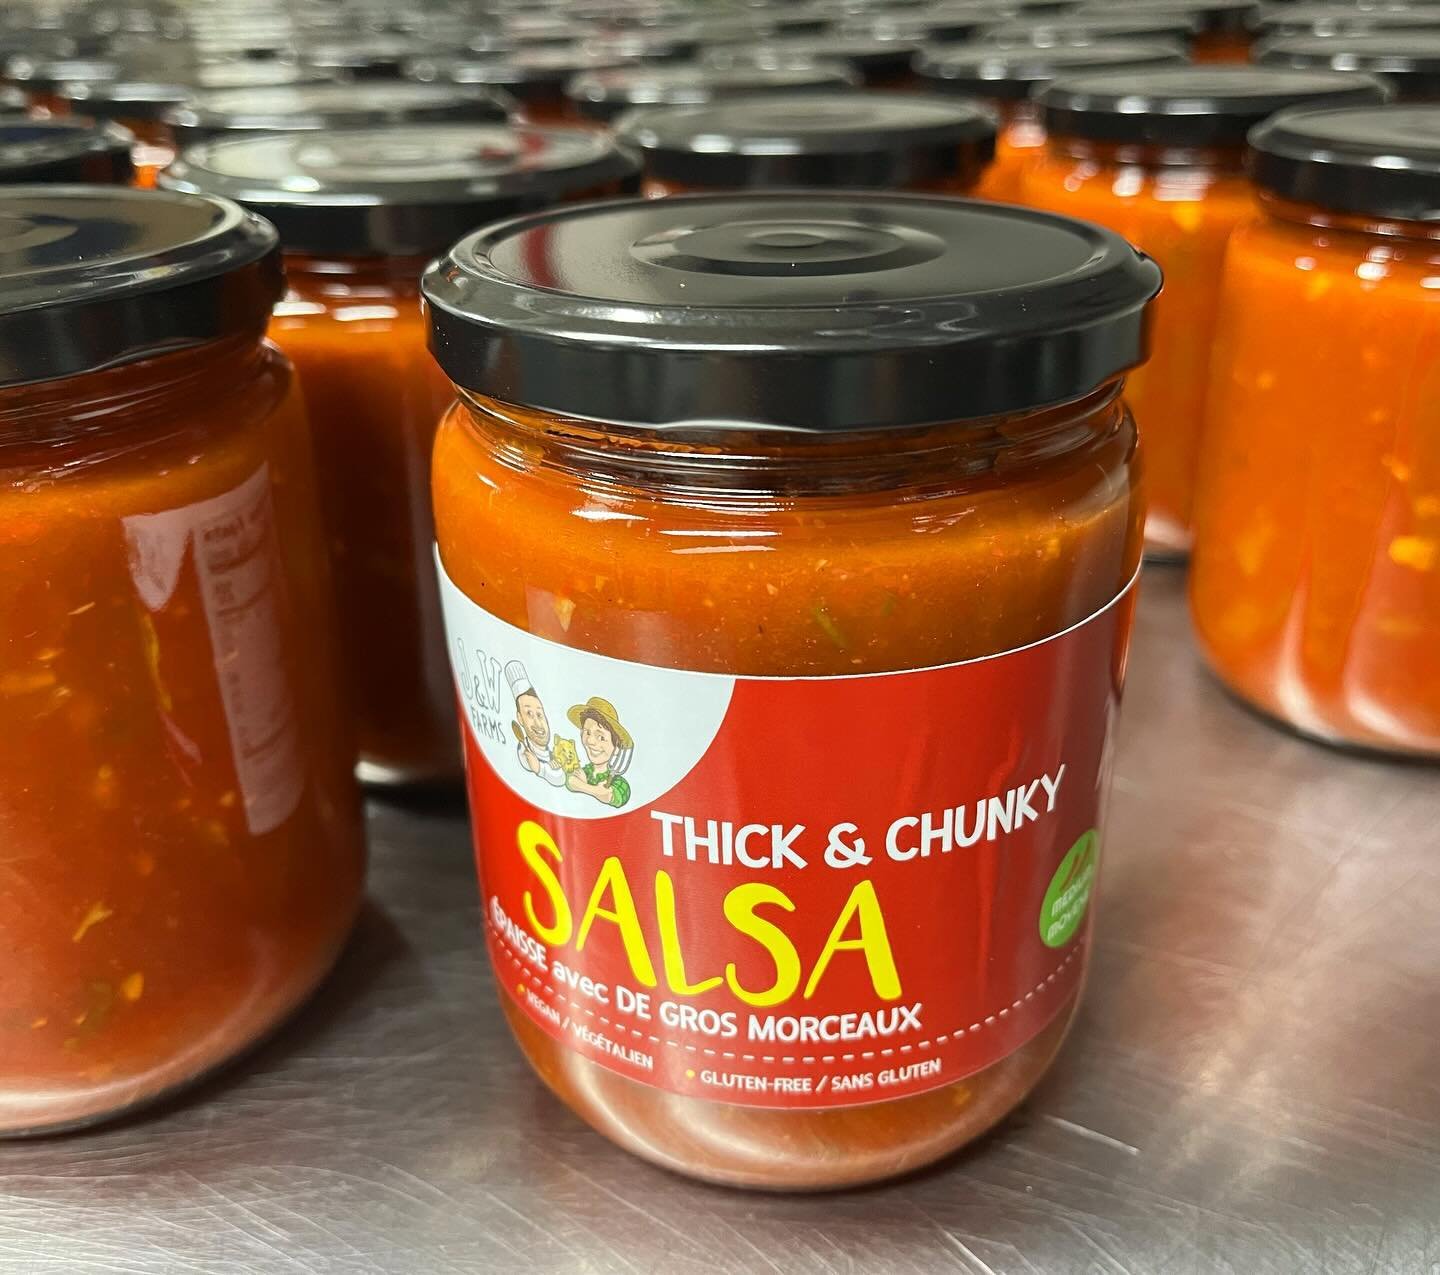 Our popular Thick &amp; Chunky Salsa in production today at our kitchen. Beautiful flavour to be enjoyed with your favourite chips or added to spice up your meals as a delicious condiment 😋